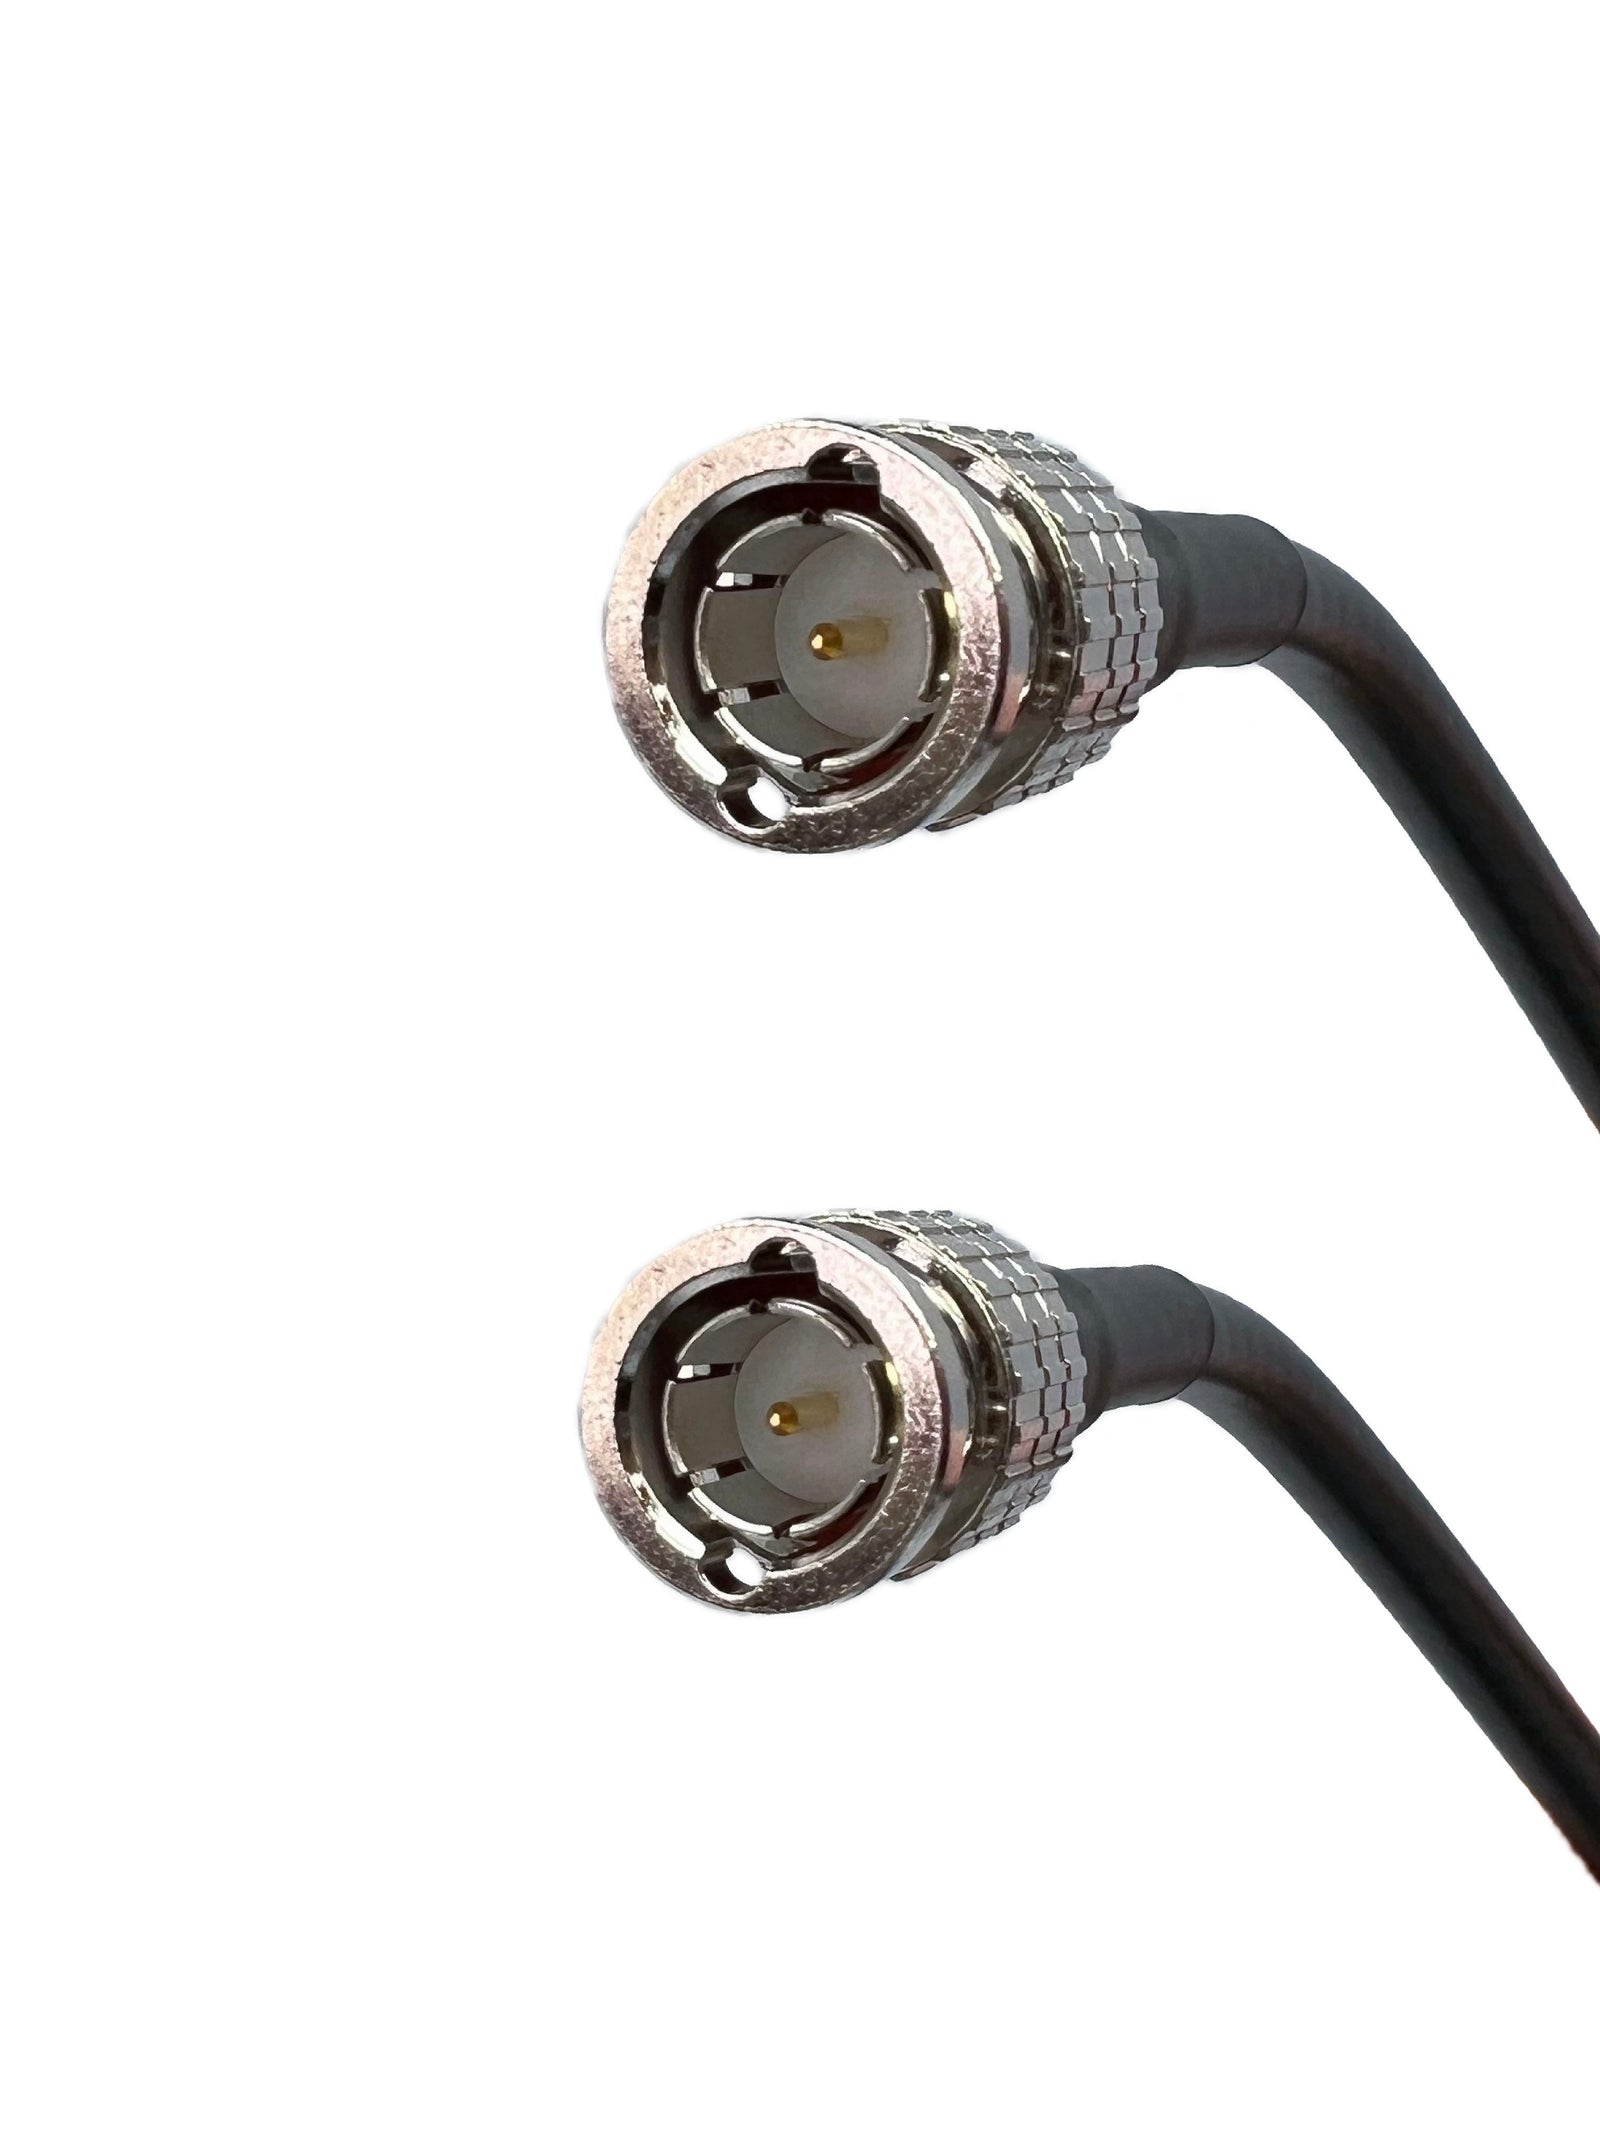 Audio Video Cables Tagged HD-SDI - Custom Cable Connection